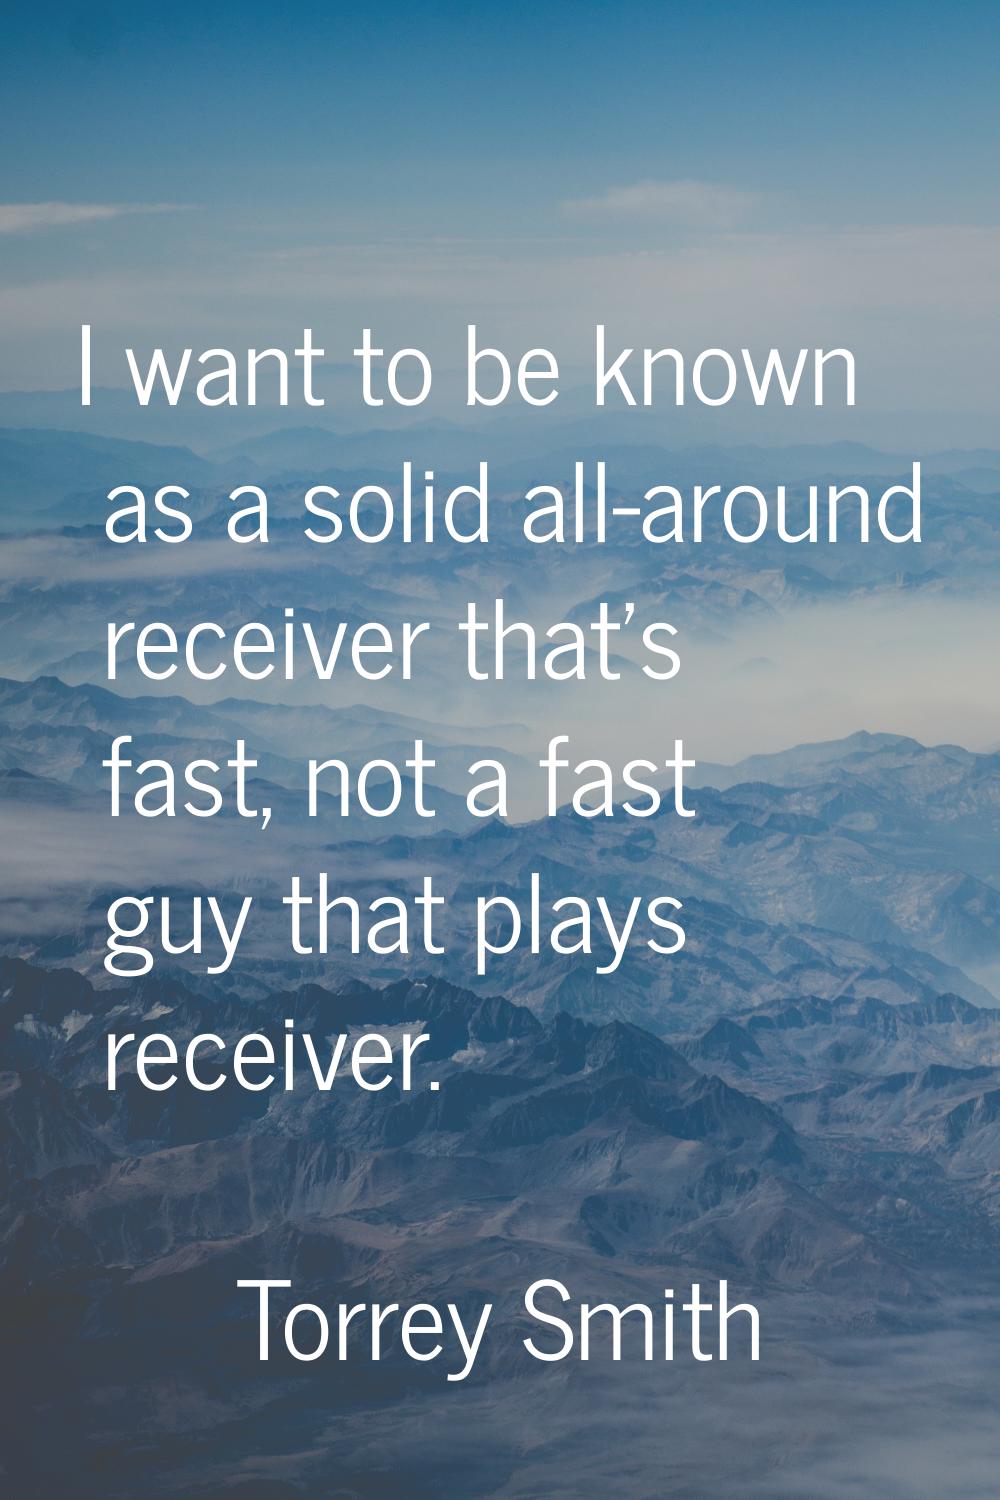 I want to be known as a solid all-around receiver that's fast, not a fast guy that plays receiver.